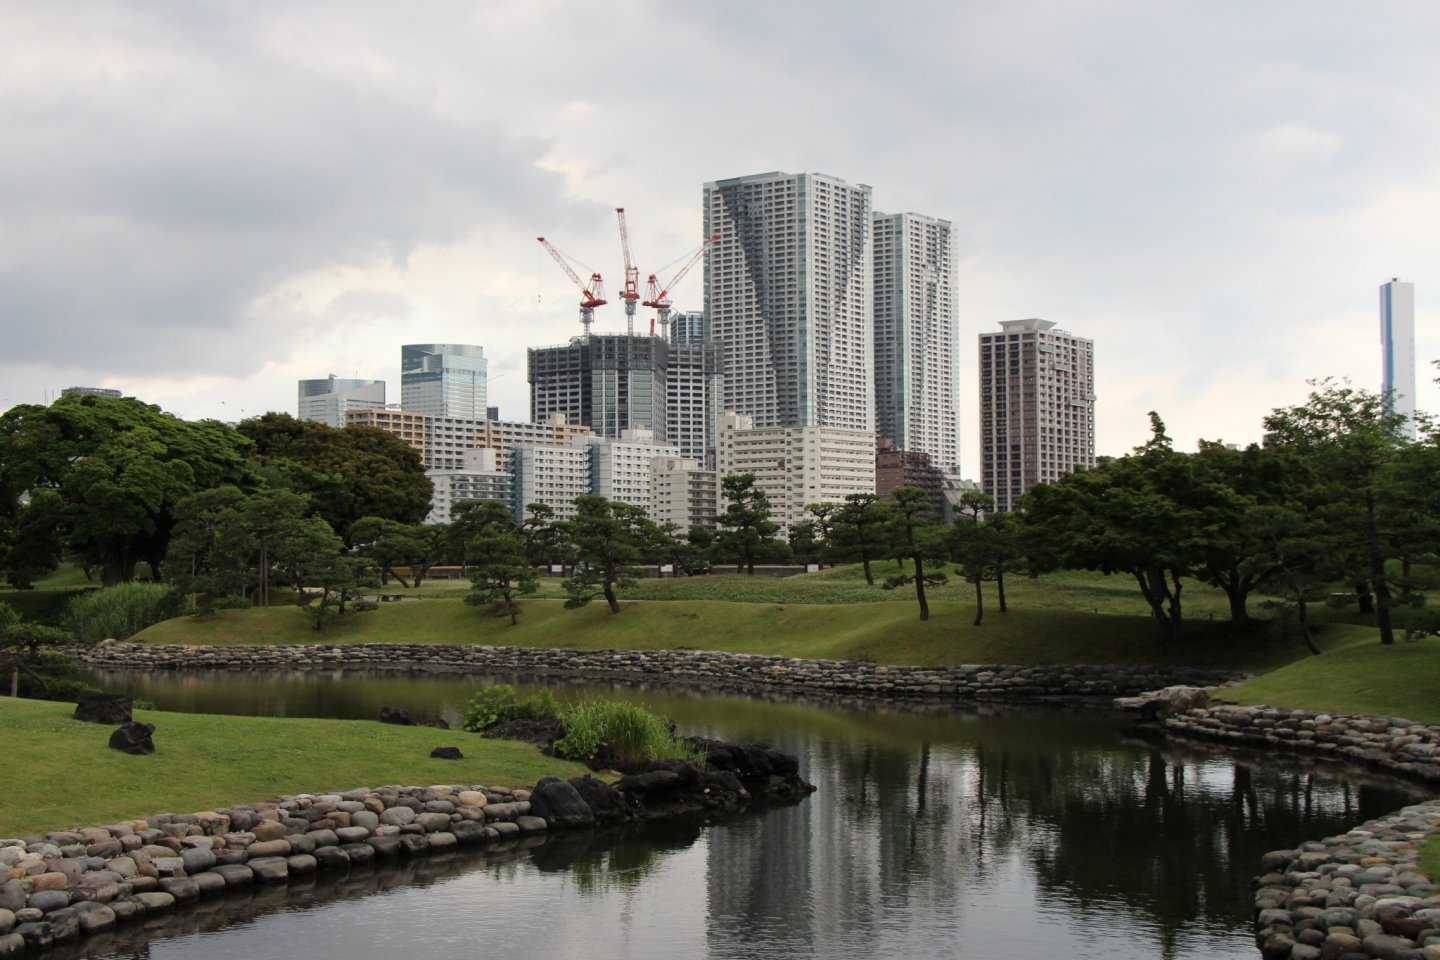 Hamarikyu Garden, one of the best nature spots of Tokyo, is completely surrounded by Shiodome district's skyscrapers